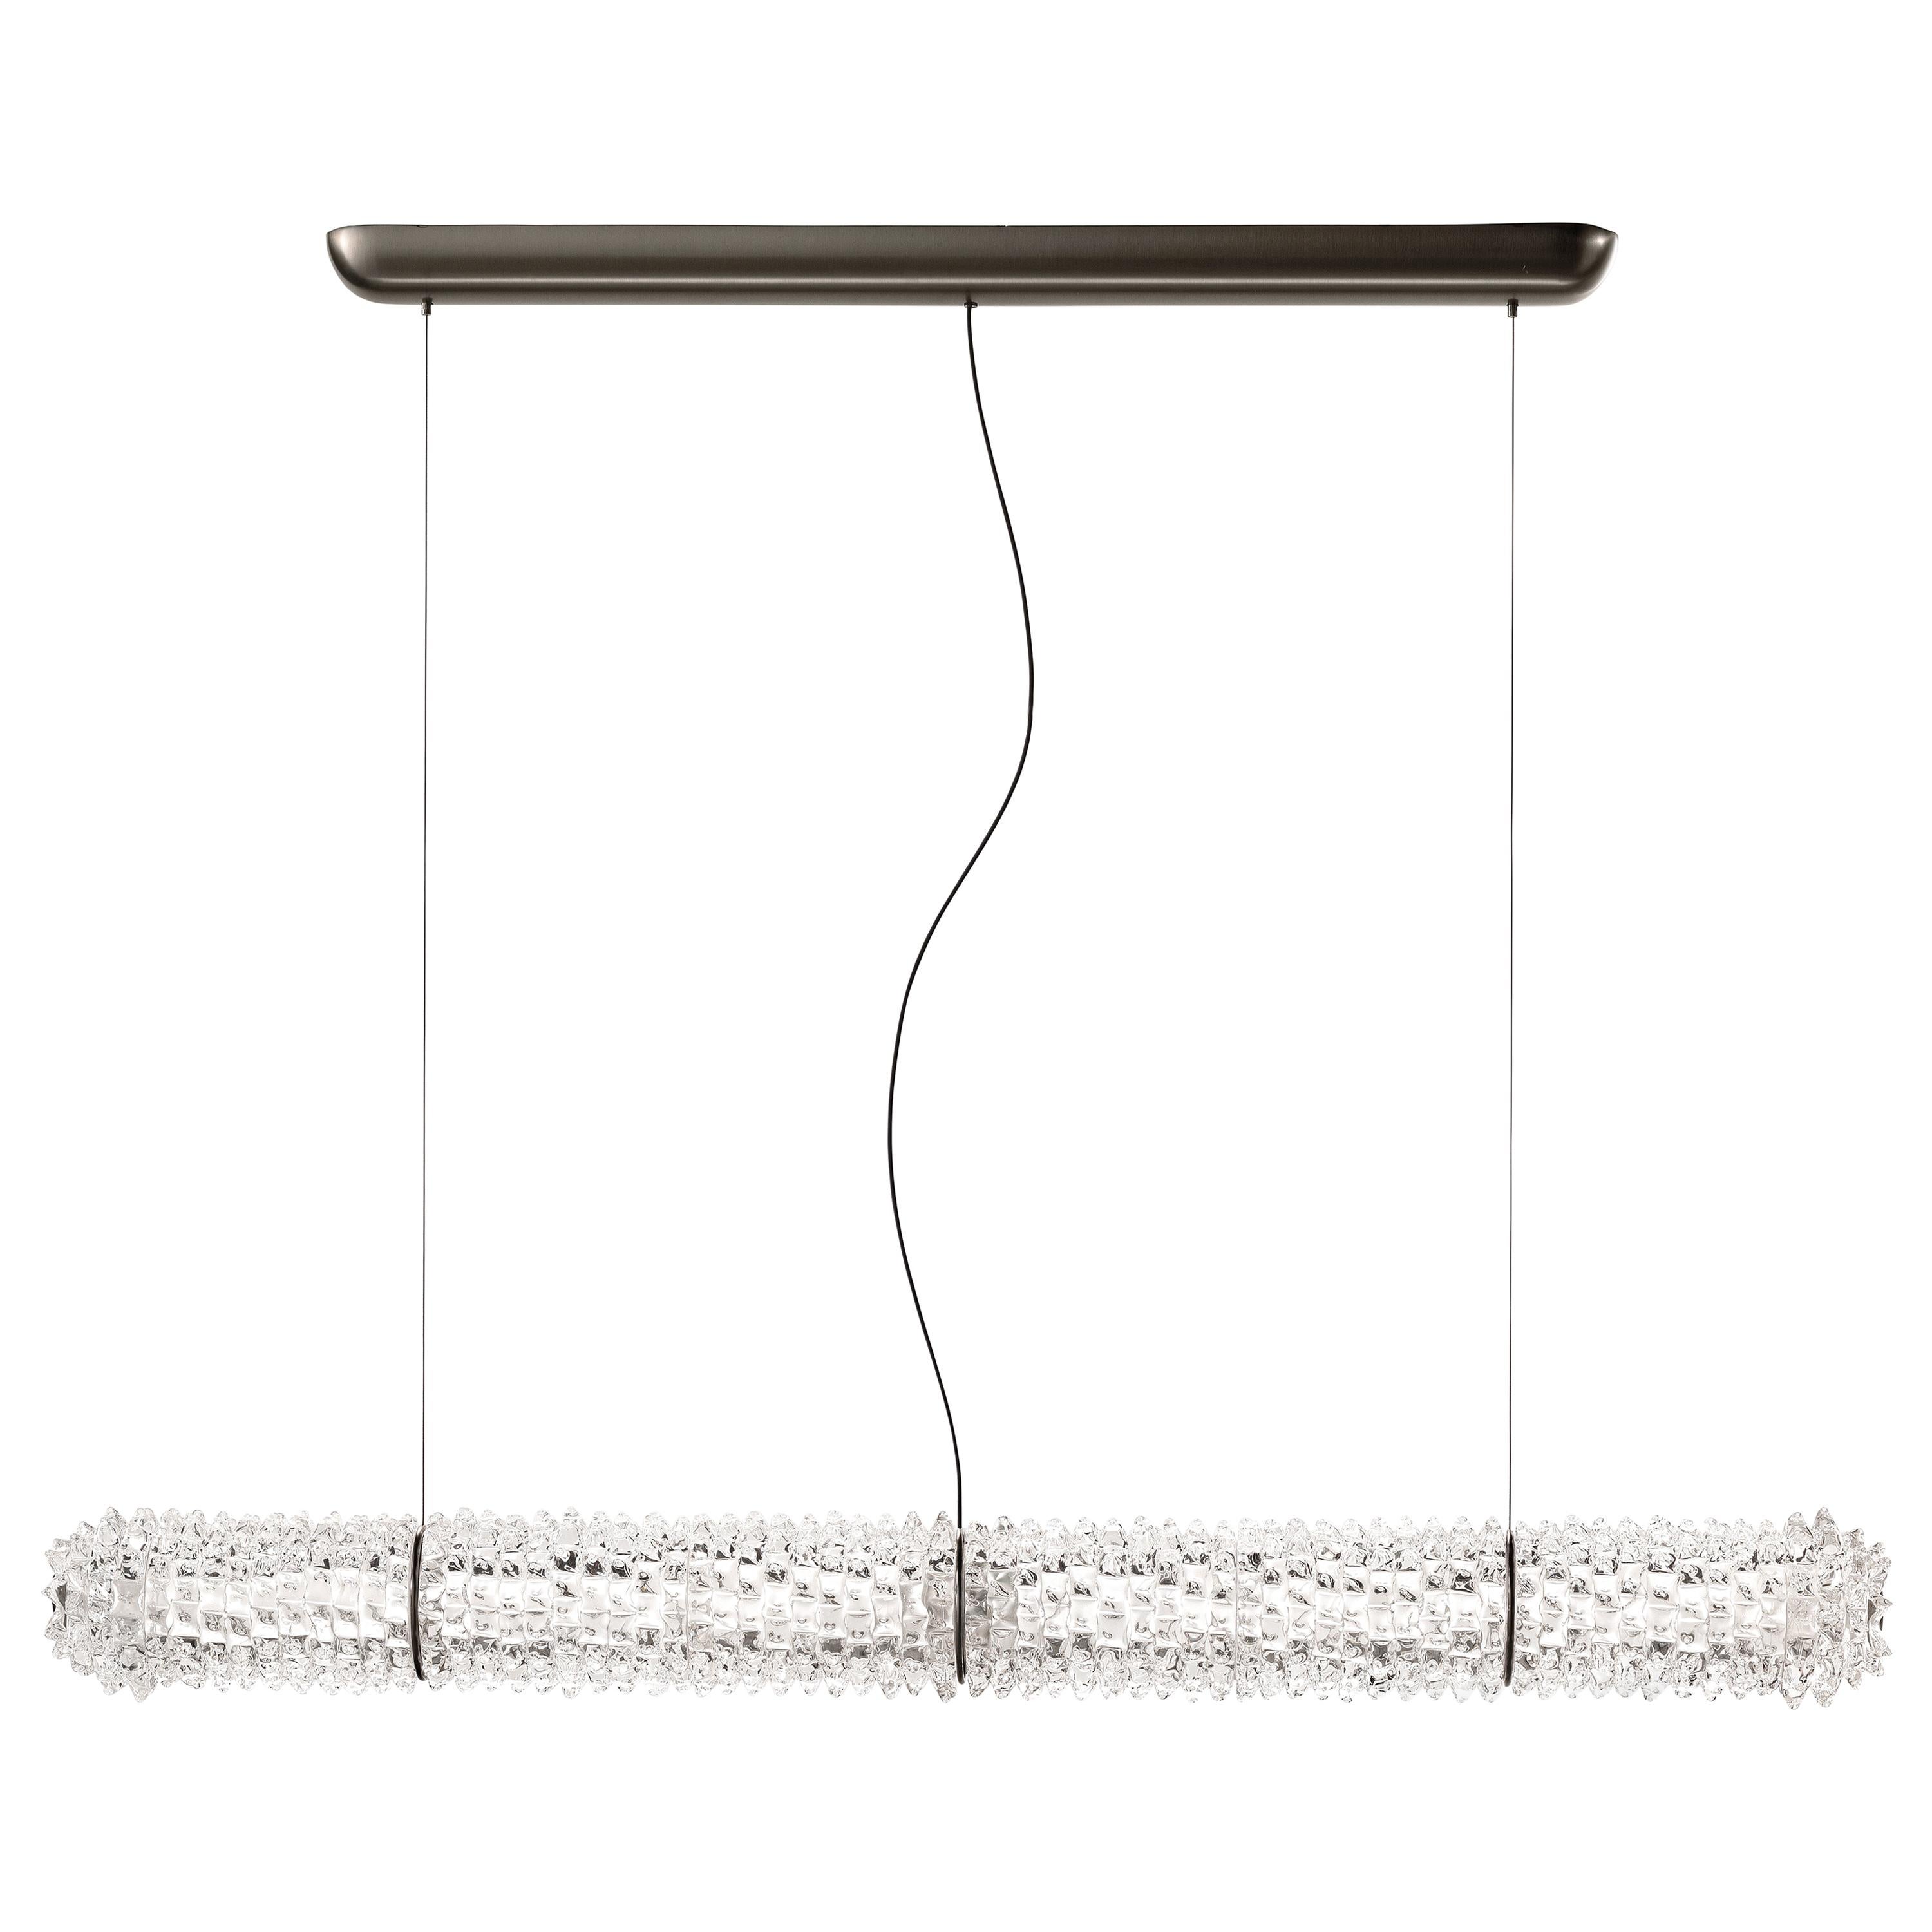 Barovier & Toso Opera 7388 Suspension Light in Crystal with Black Nickel Finish